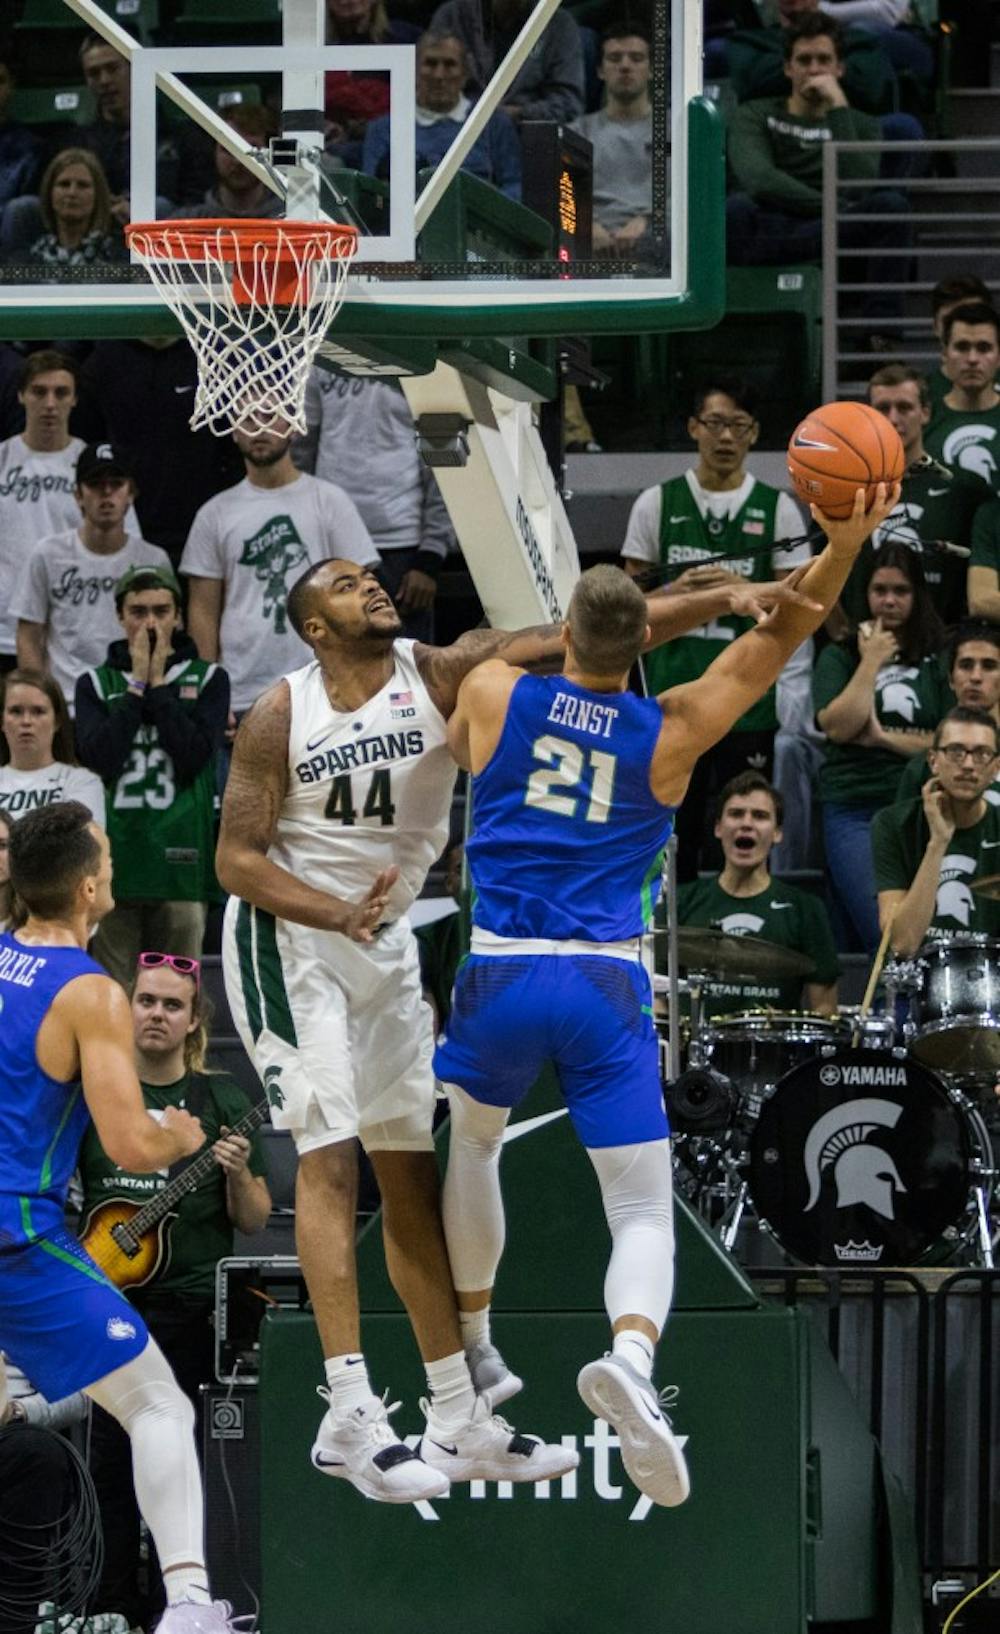 Junior forward Nick Ward (44) blocks a shot during the game against Florida Gulf Coast University at Breslin Center on Nov. 11, 2018. The Spartans defeated the Eagles, 106-82.